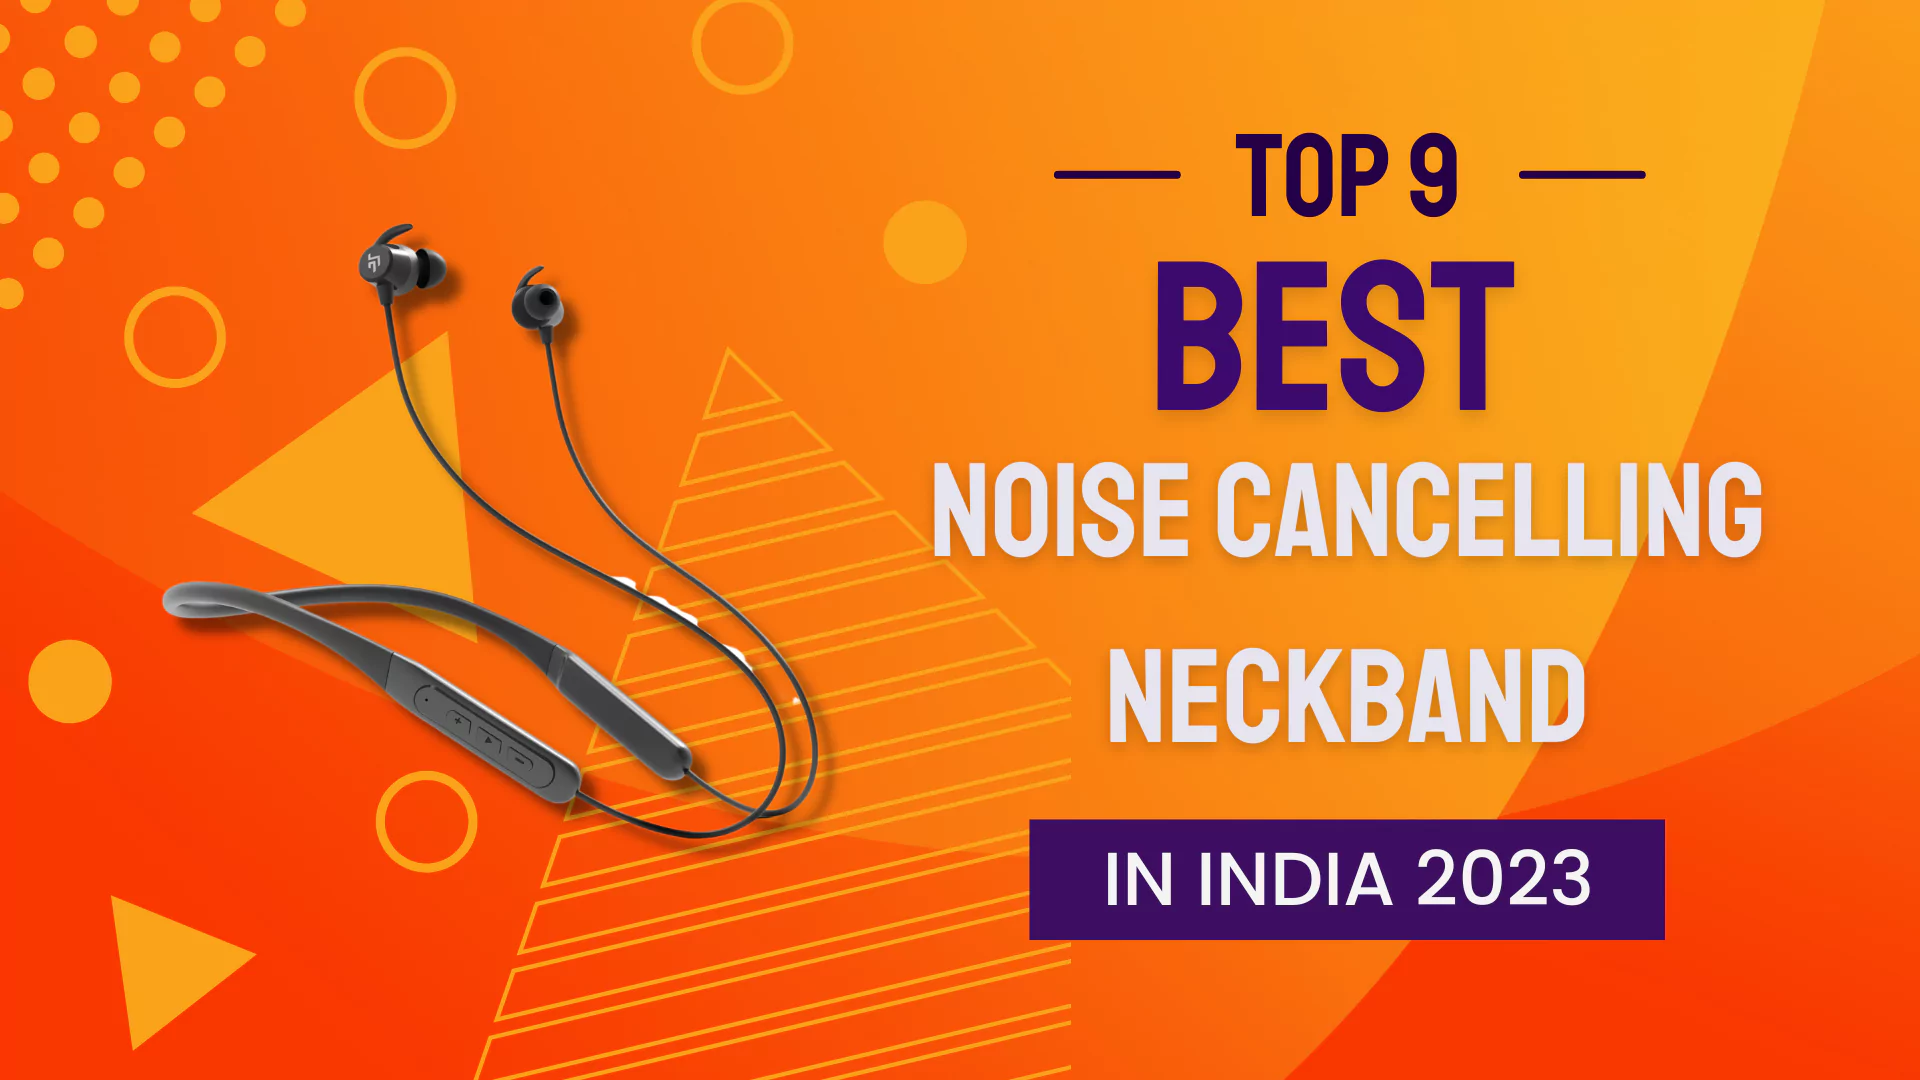 Best Noise Cancelling Neckband